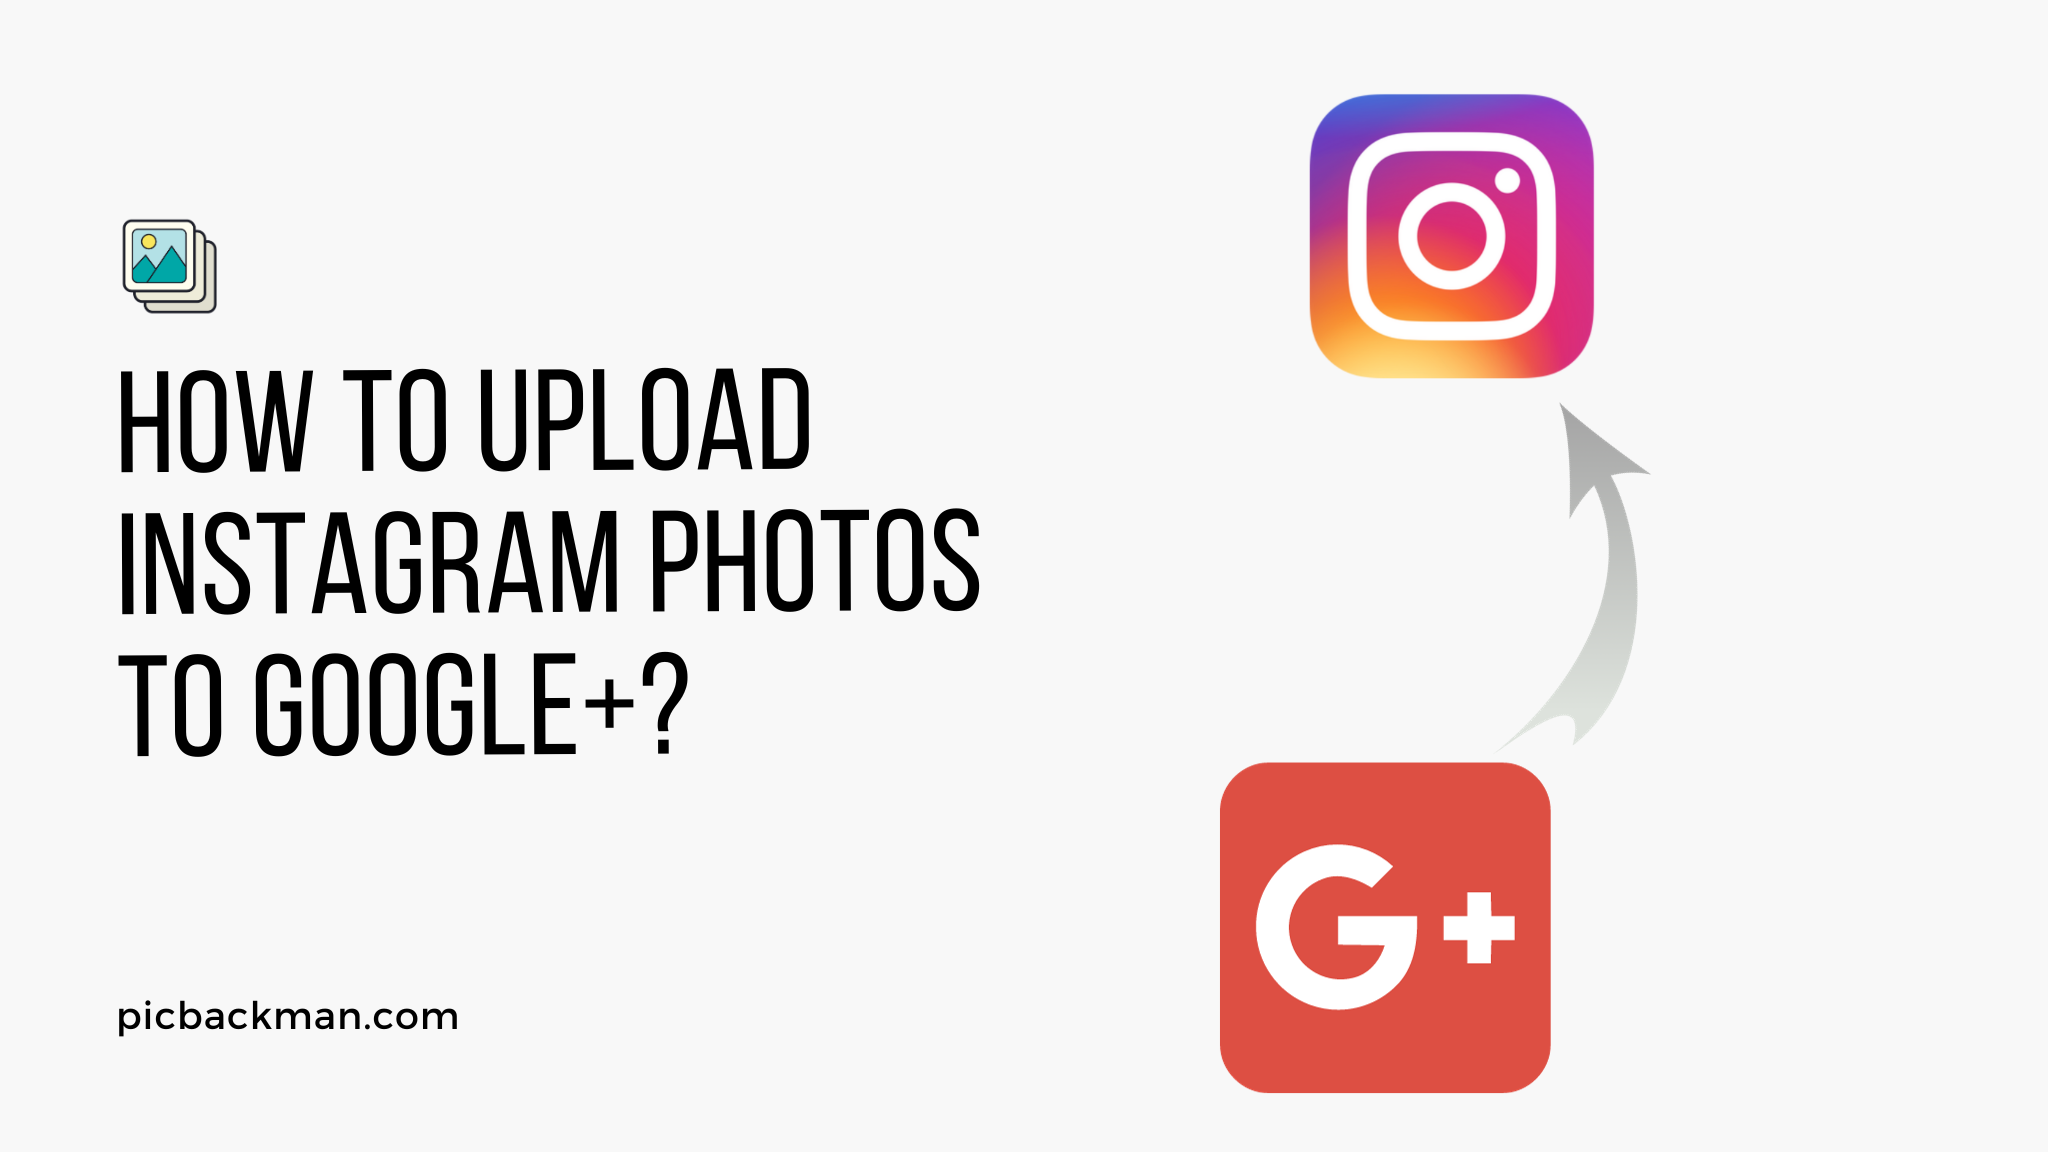 How to upload Instagram photos to Google+?